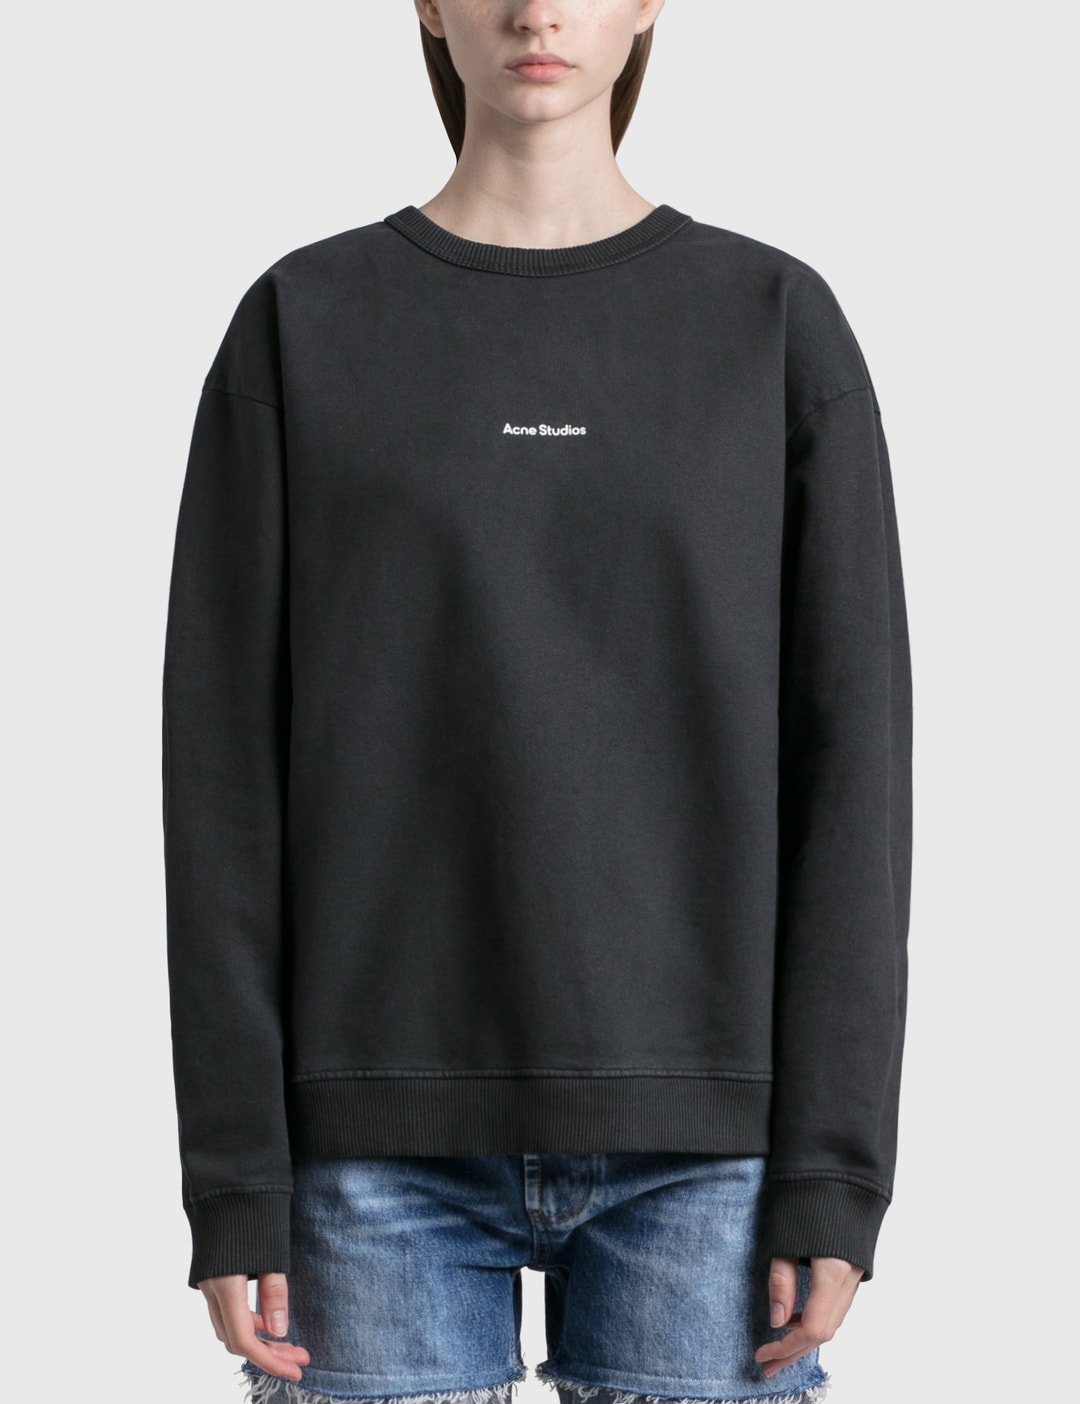 Acne Studios Fierre Stamp Sweatshirt | HBX - Globally Curated Fashion and Lifestyle by Hypebeast